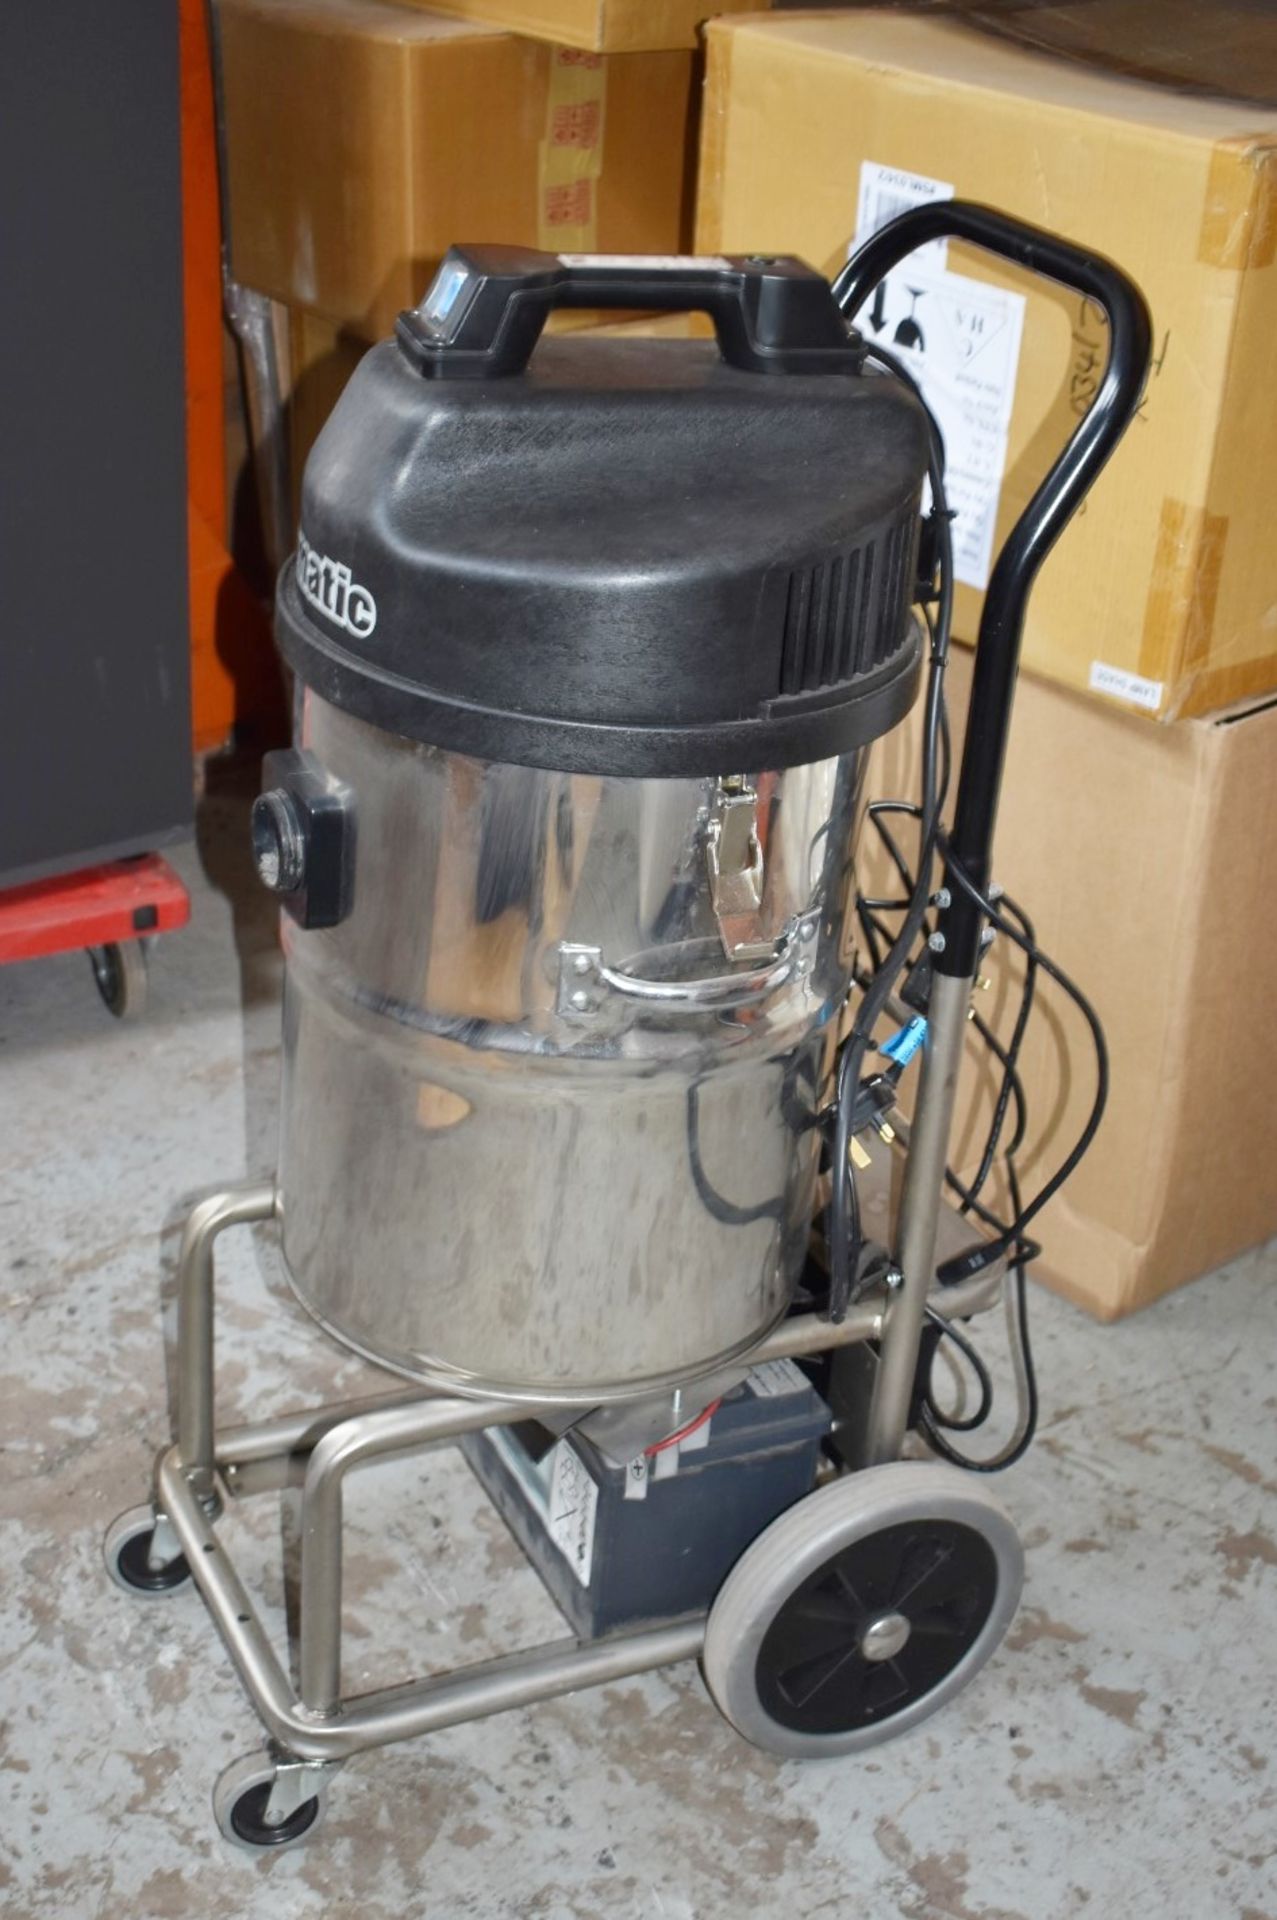 1 x Numatic WVDB750 Battery Powered Wet & Dry Vacuum Cleaner With Stainless Steel Body - Image 6 of 7